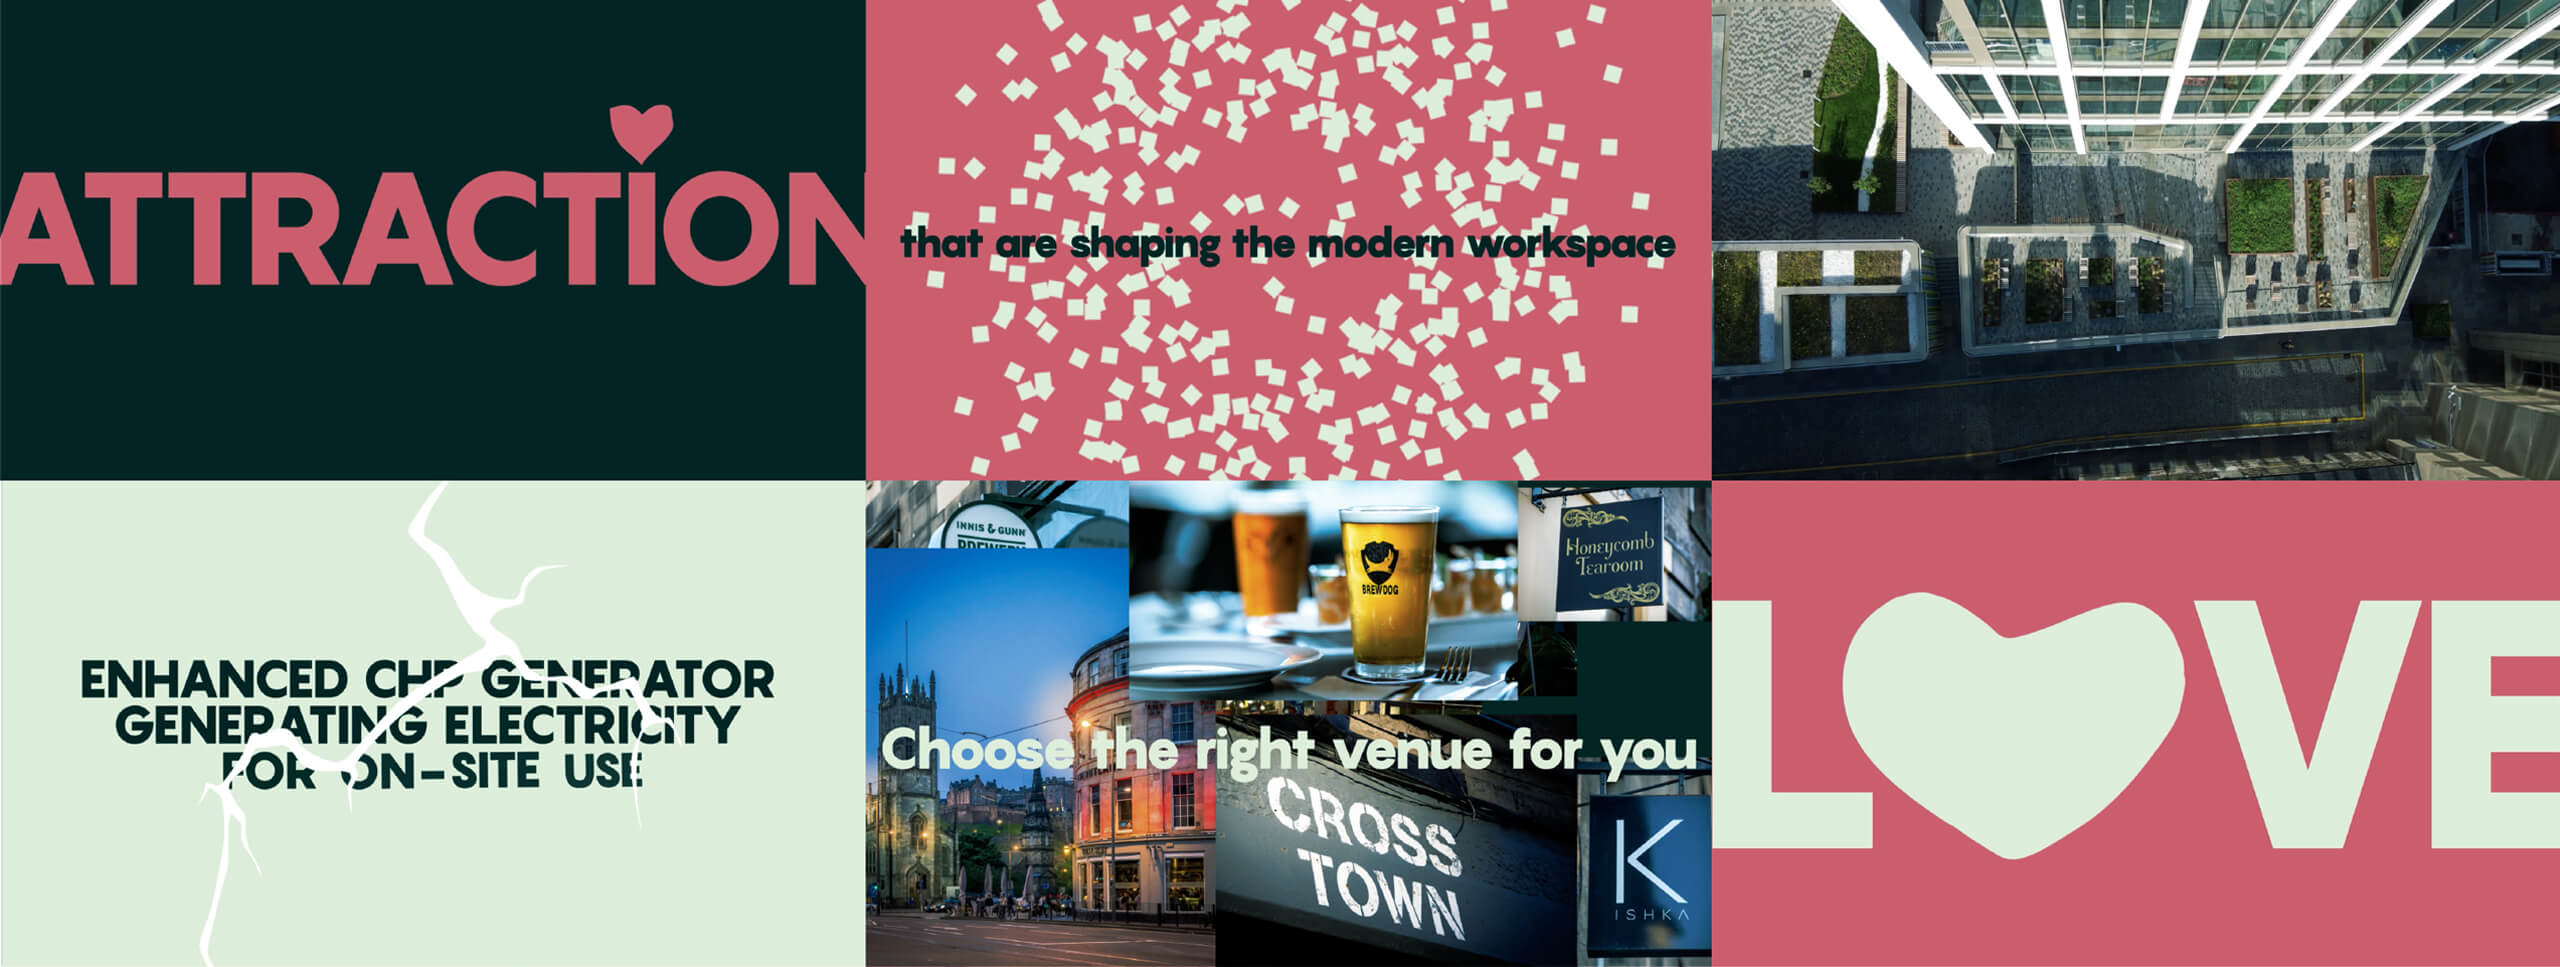 Capital Square advertising examples